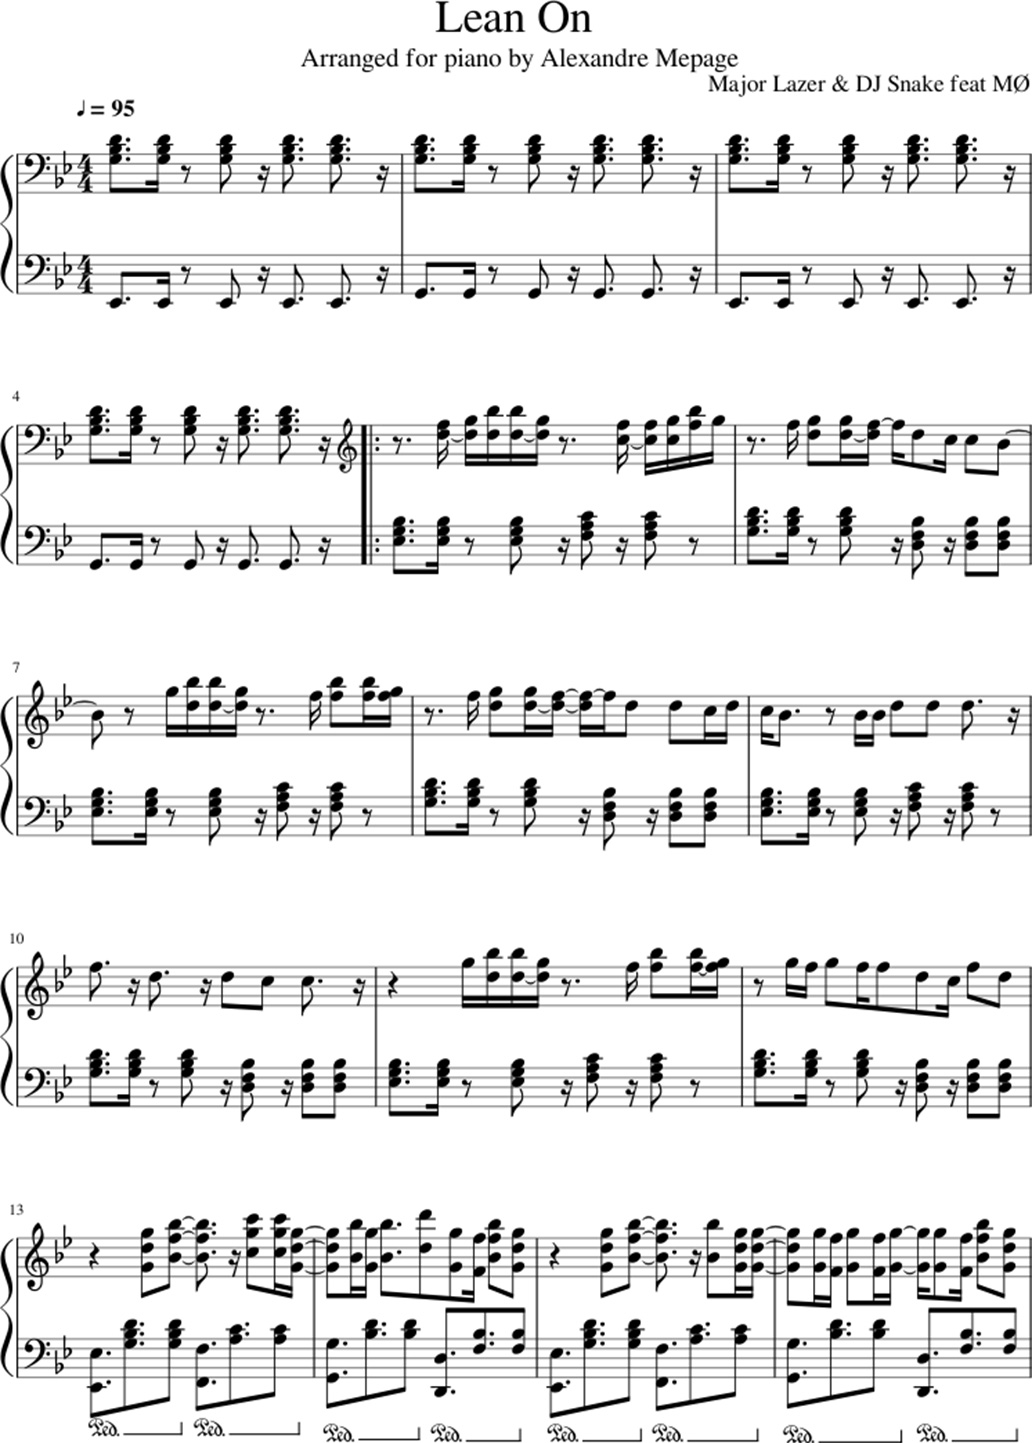 Lean on sheet music notes 1